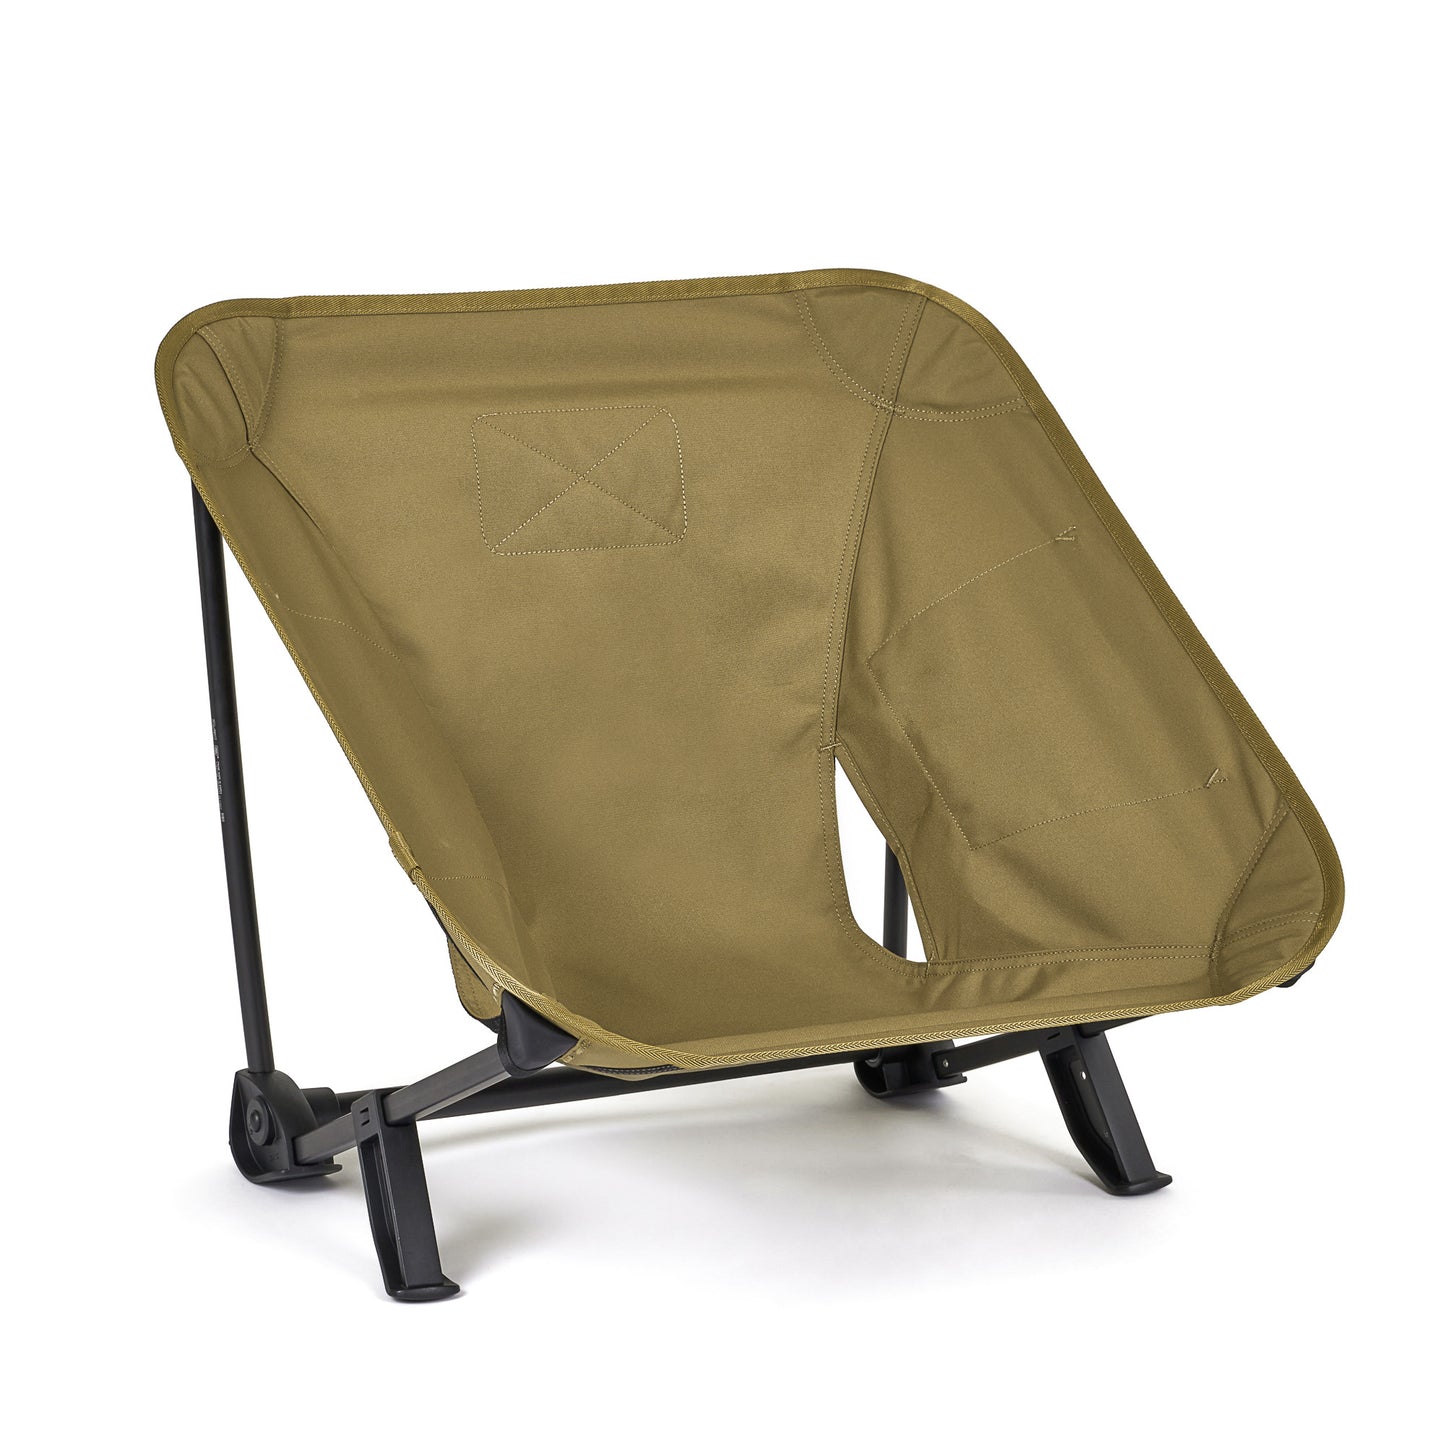 Tac. Incline Chair - Coyote Tan